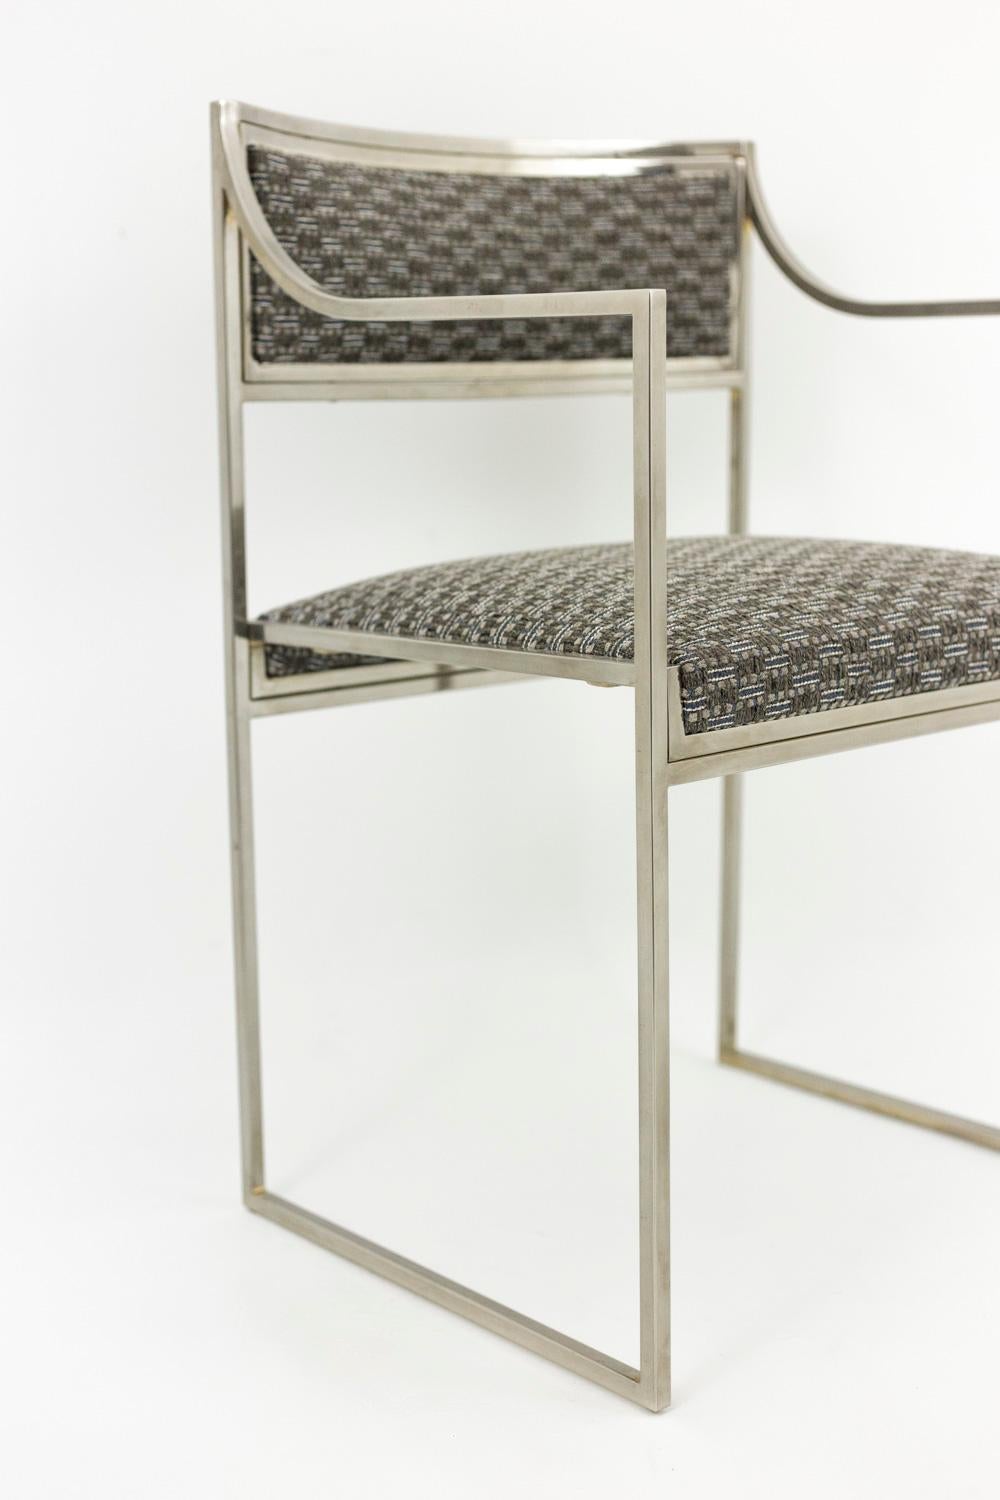 Willy Rizzo, Chromed Metal Armchair, 1970s For Sale 4